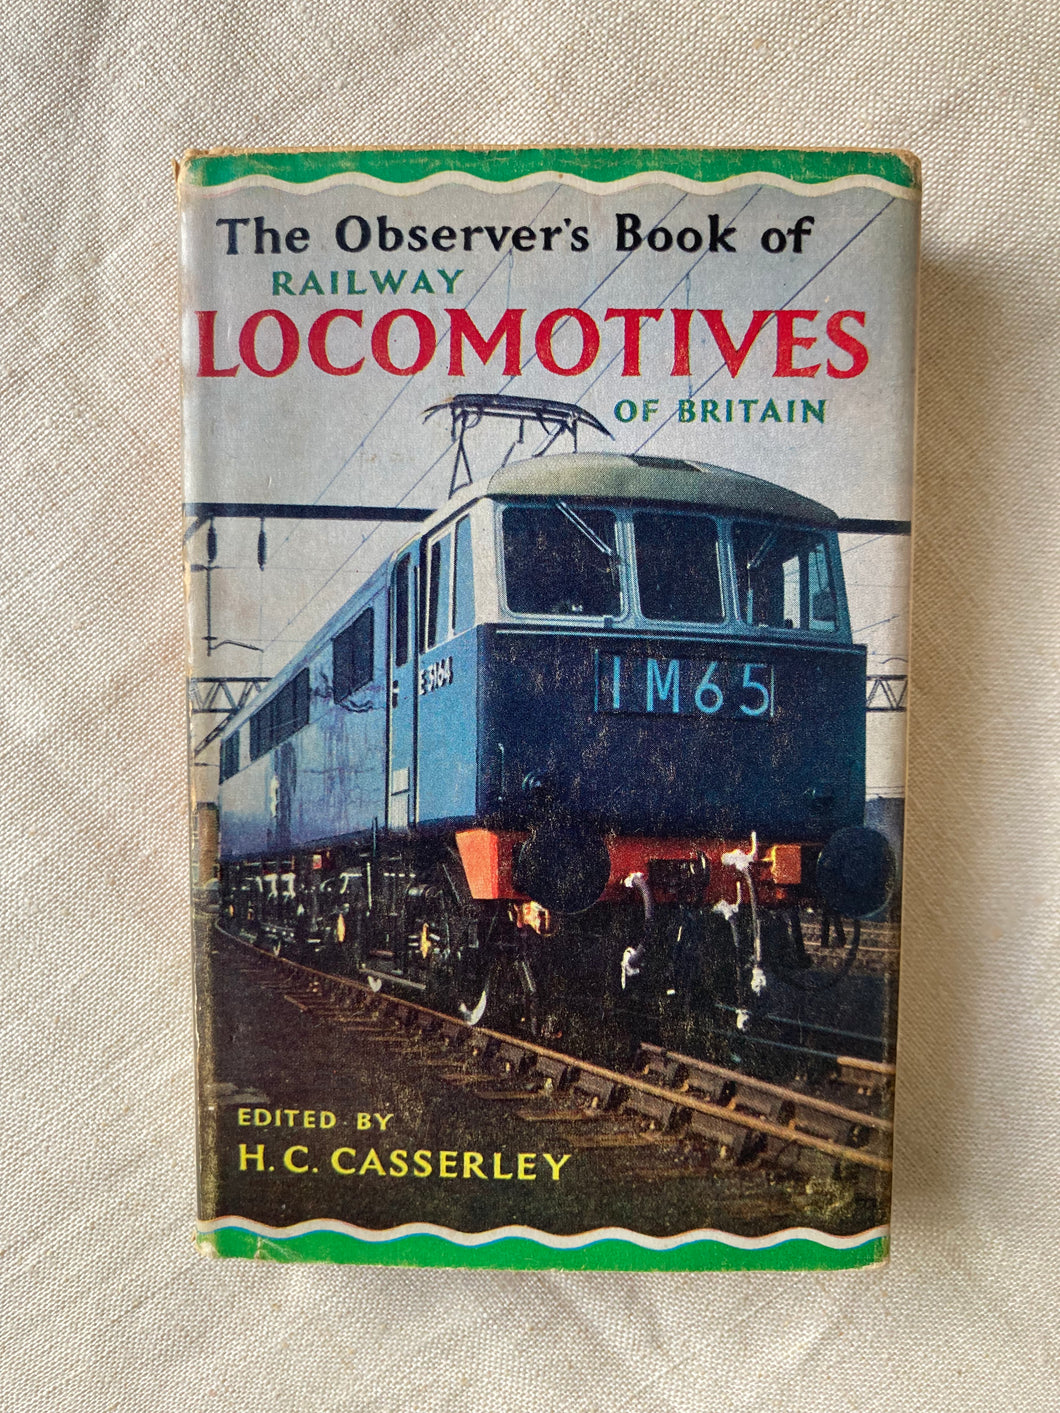 The Observer Book of Railway Locomotives of Britain no. 23